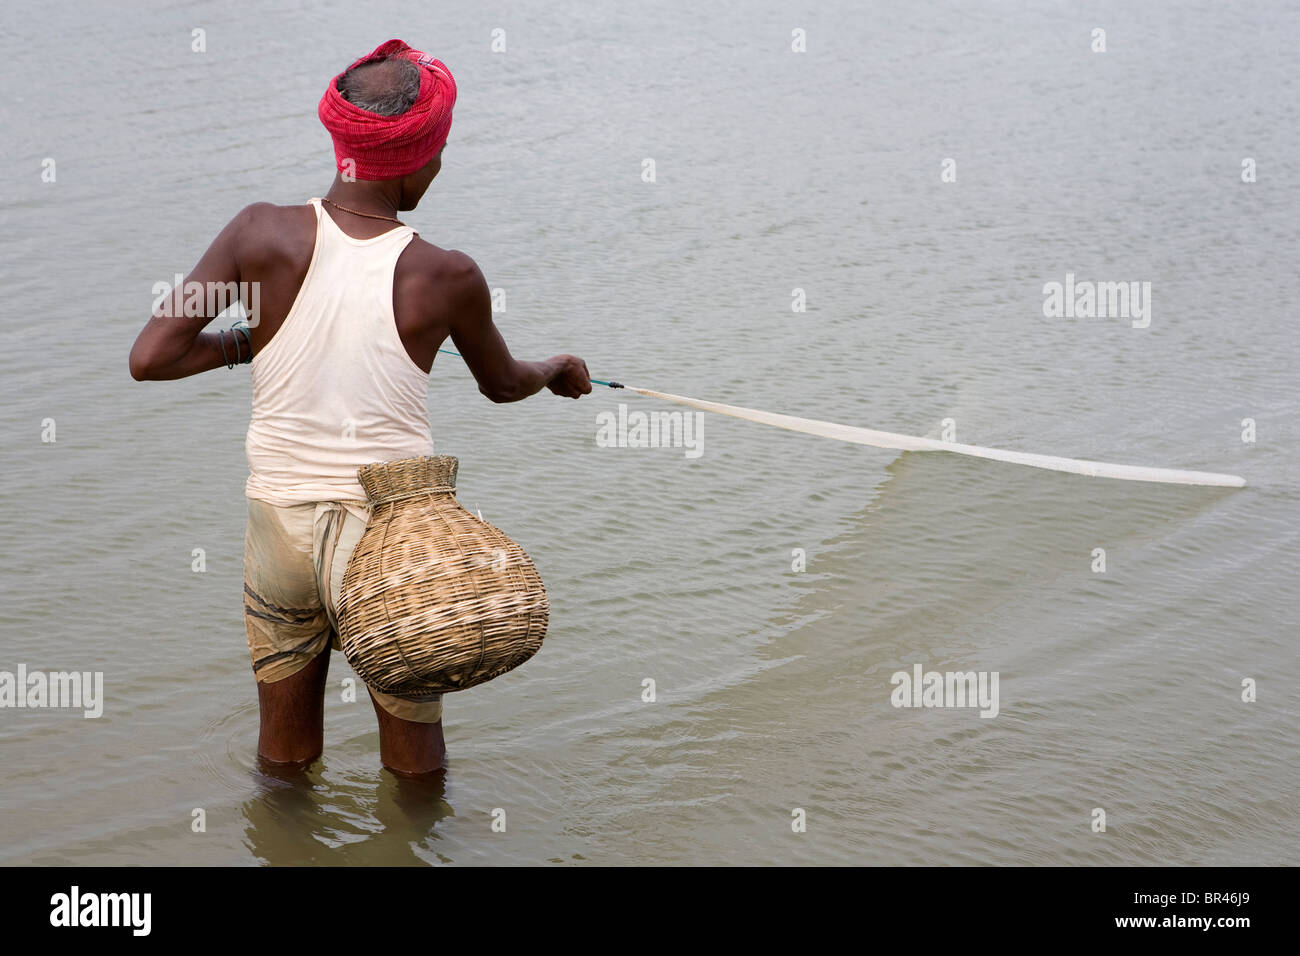 An Indian fisherman with a basket is fishing by net in the sea